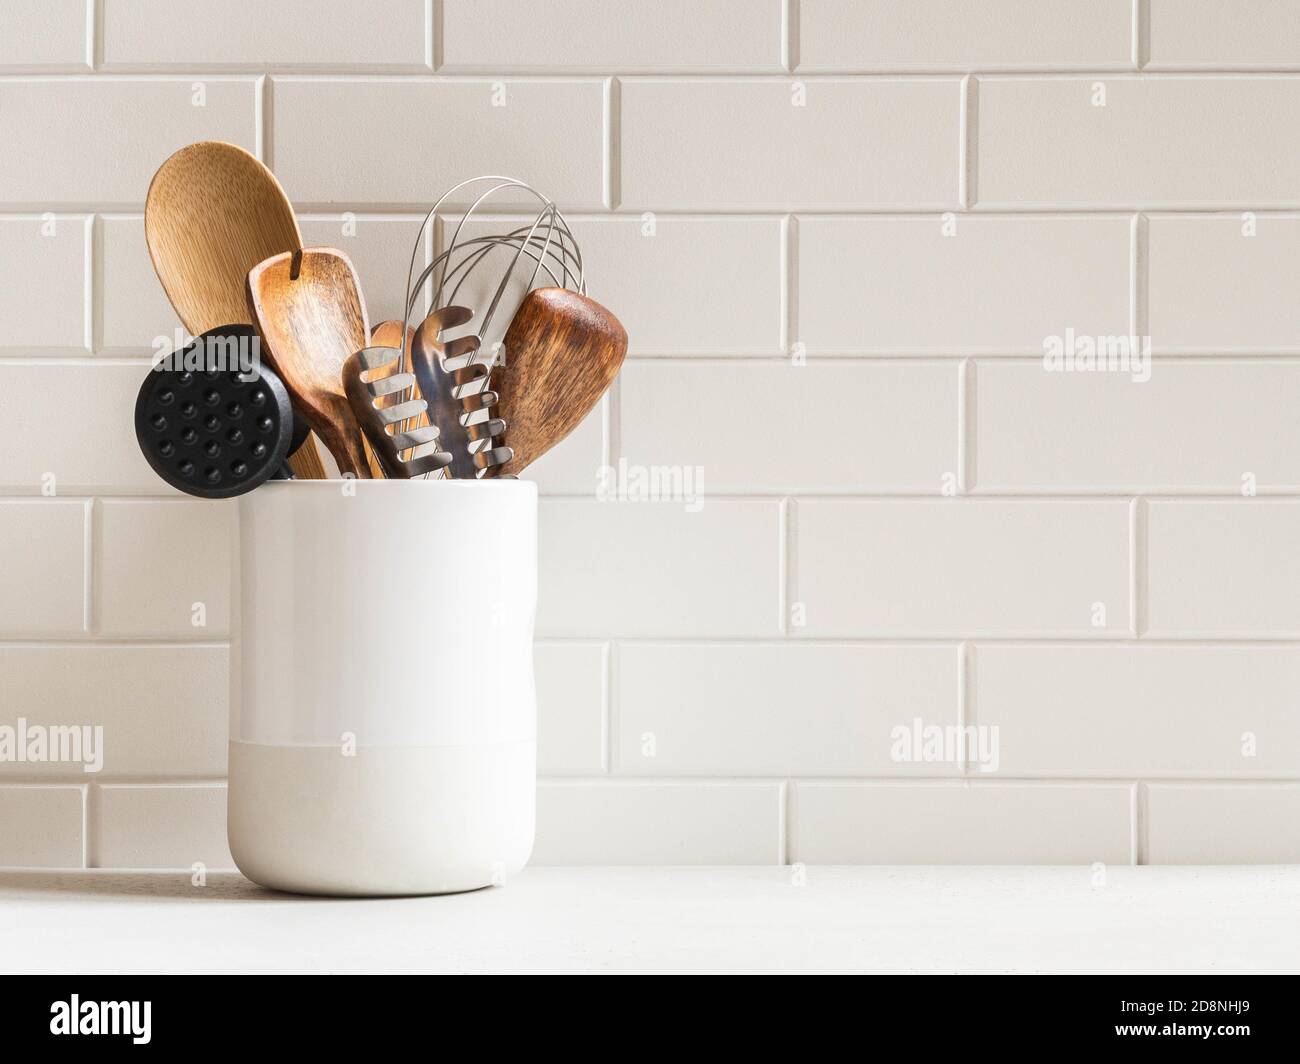 Stylish white kitchen background with kitchen utensils in ceramic jar on white countertop, copy space for text, front view Stock Photo